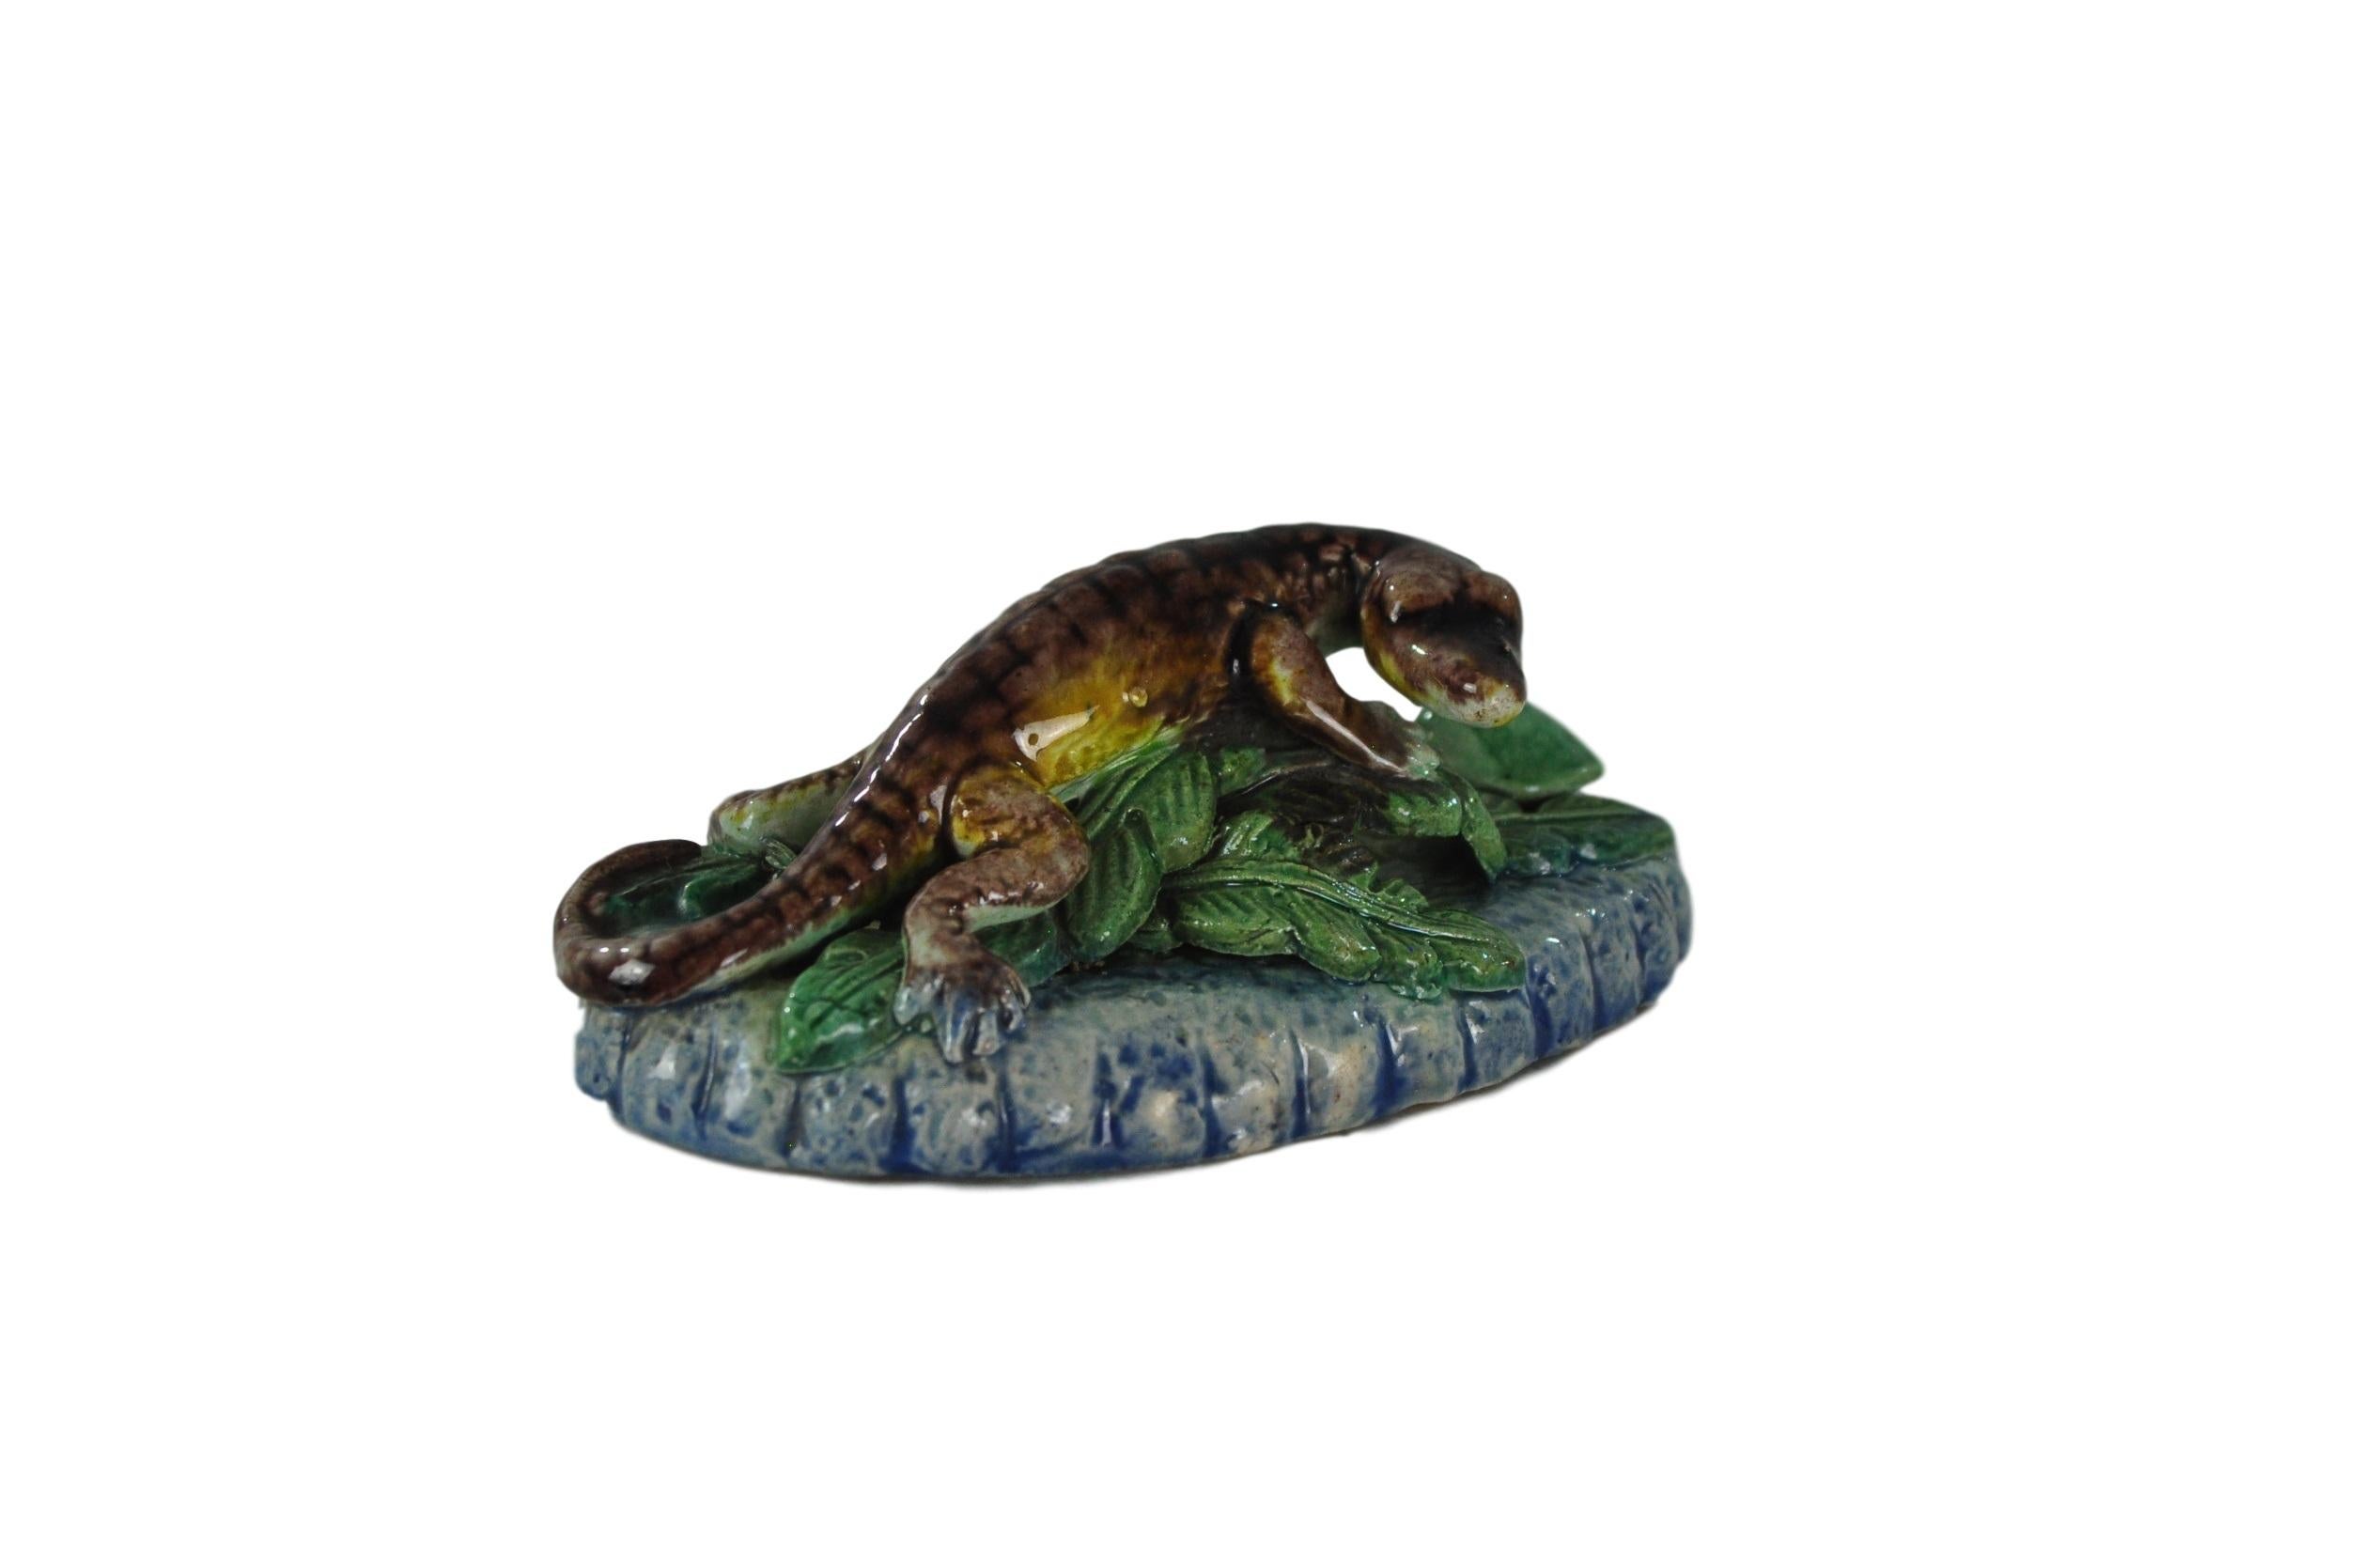 Thomas Sergent Palissy Ware lizard on rock paperweight, French, ca. 1880.